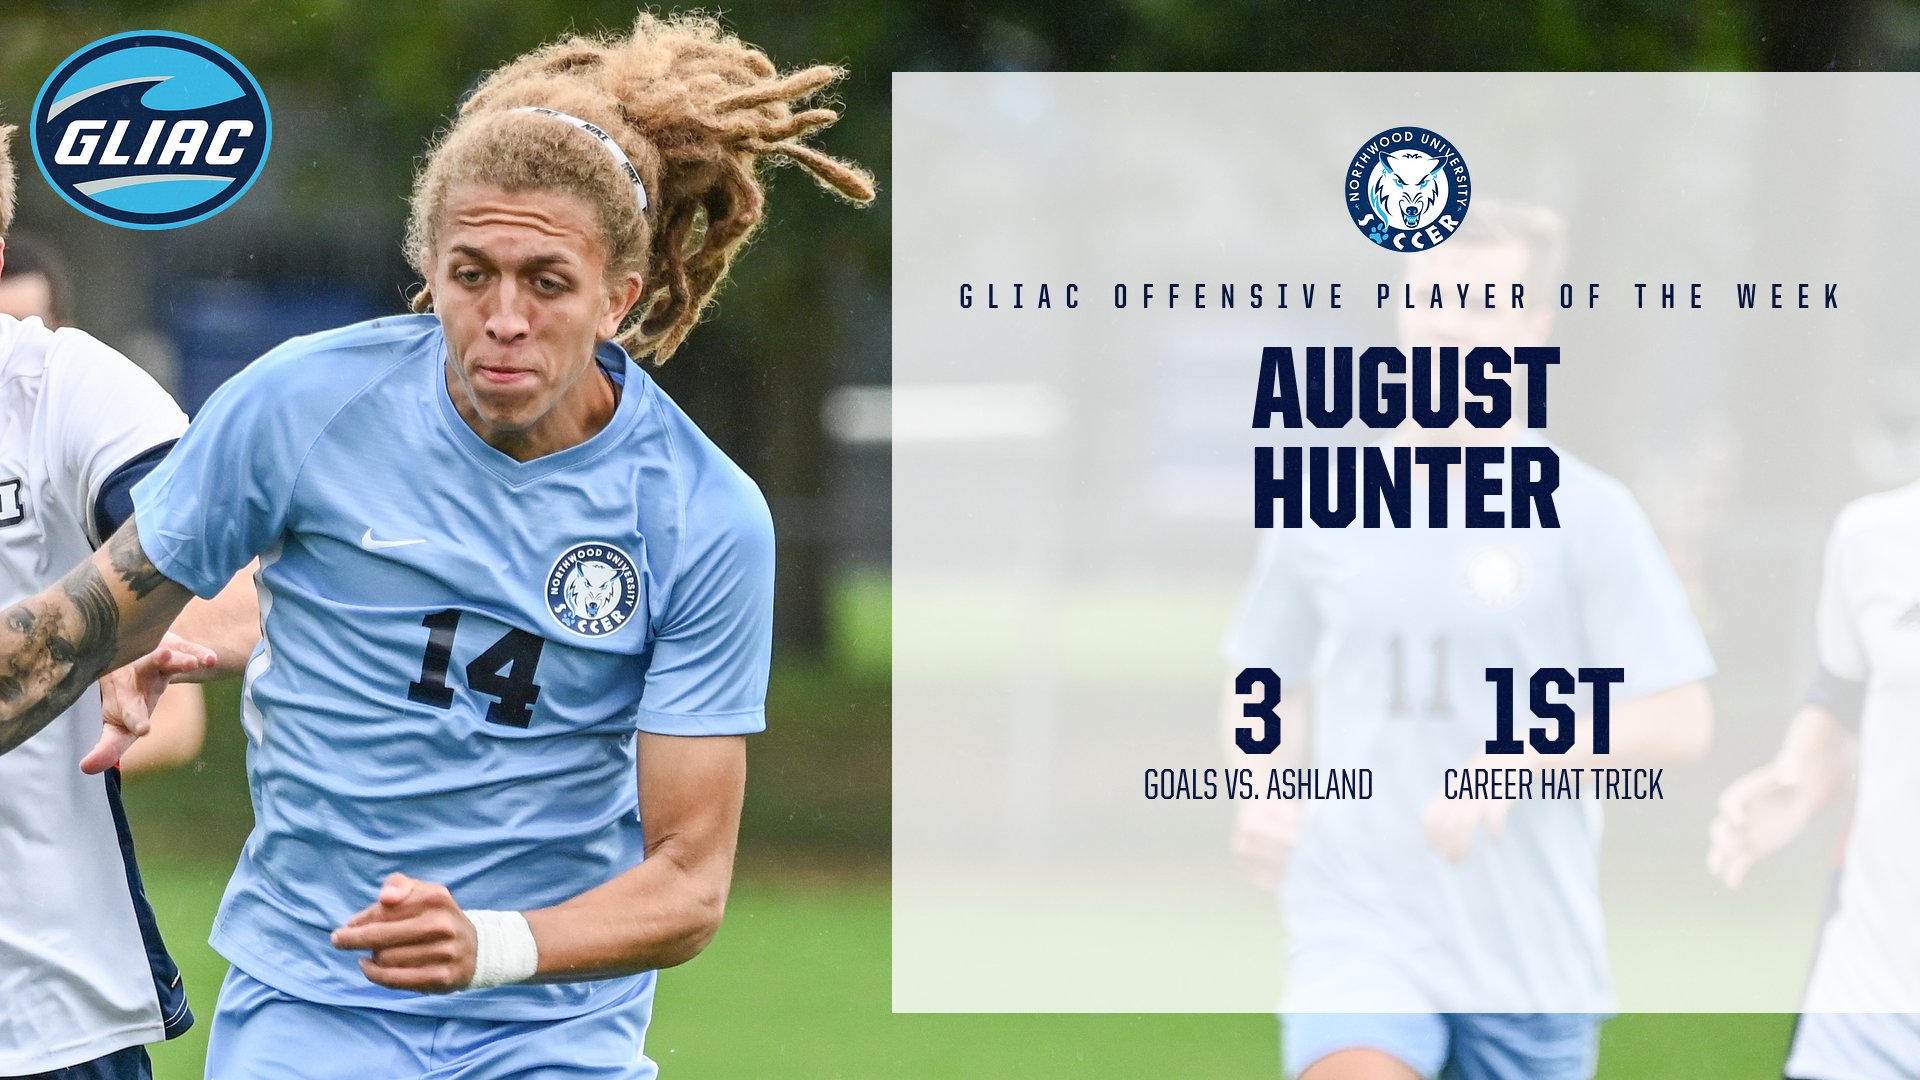 August Hunter Named GLIAC Offensive Player of the Week